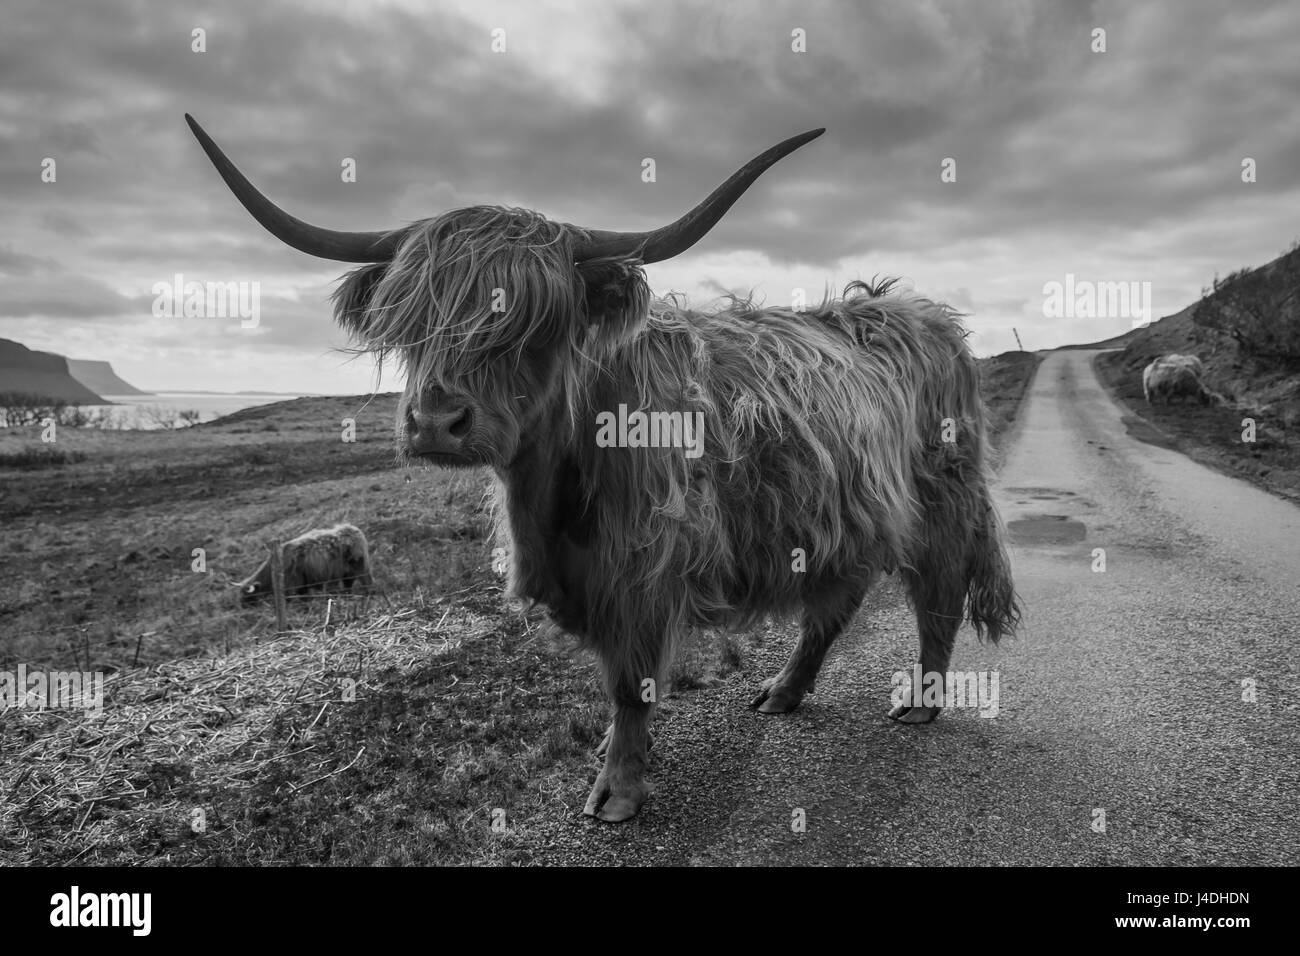 Highland cow Black and White Stock Photos & Images - Alamy